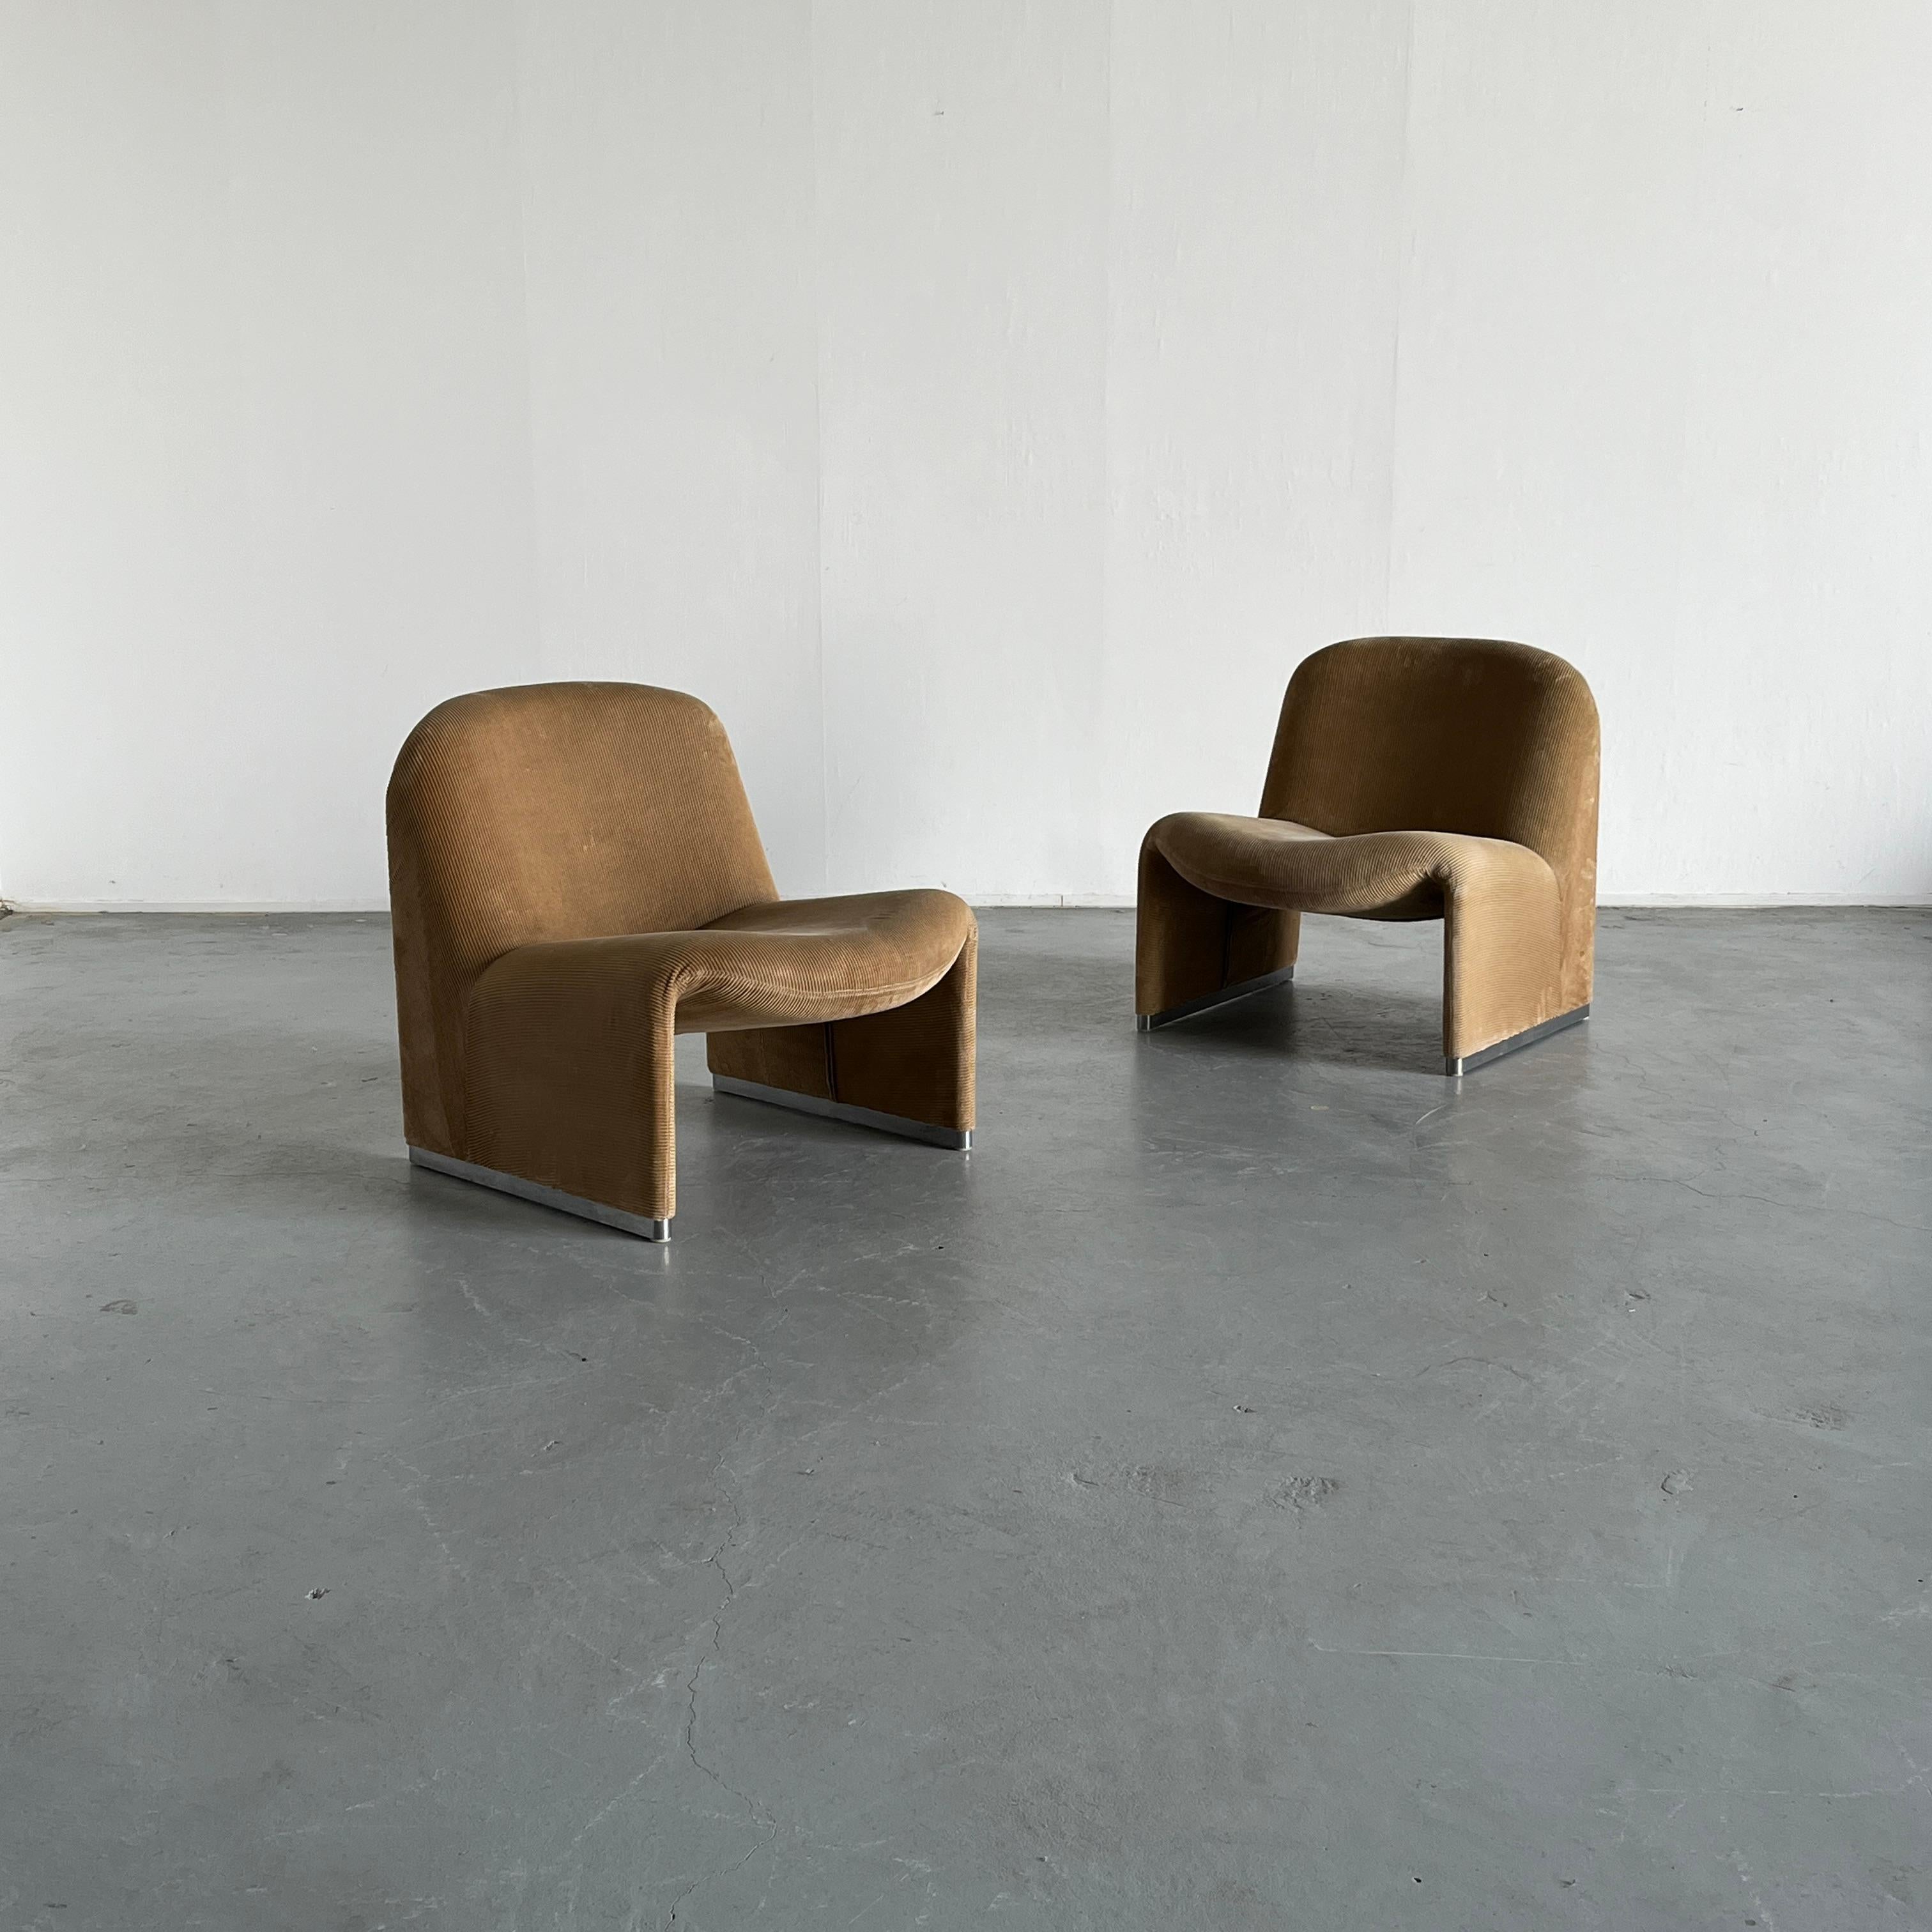 Two original vintage iconic 'Alky' chairs, designed by Giancarlo Piretti for Anonima Castelli.
A rare early 1970s production in beige 100% cotton corduroy.
Iconic Italian design.

Sold as a pair (two pieces)

Labeled.

Original vintage condition and